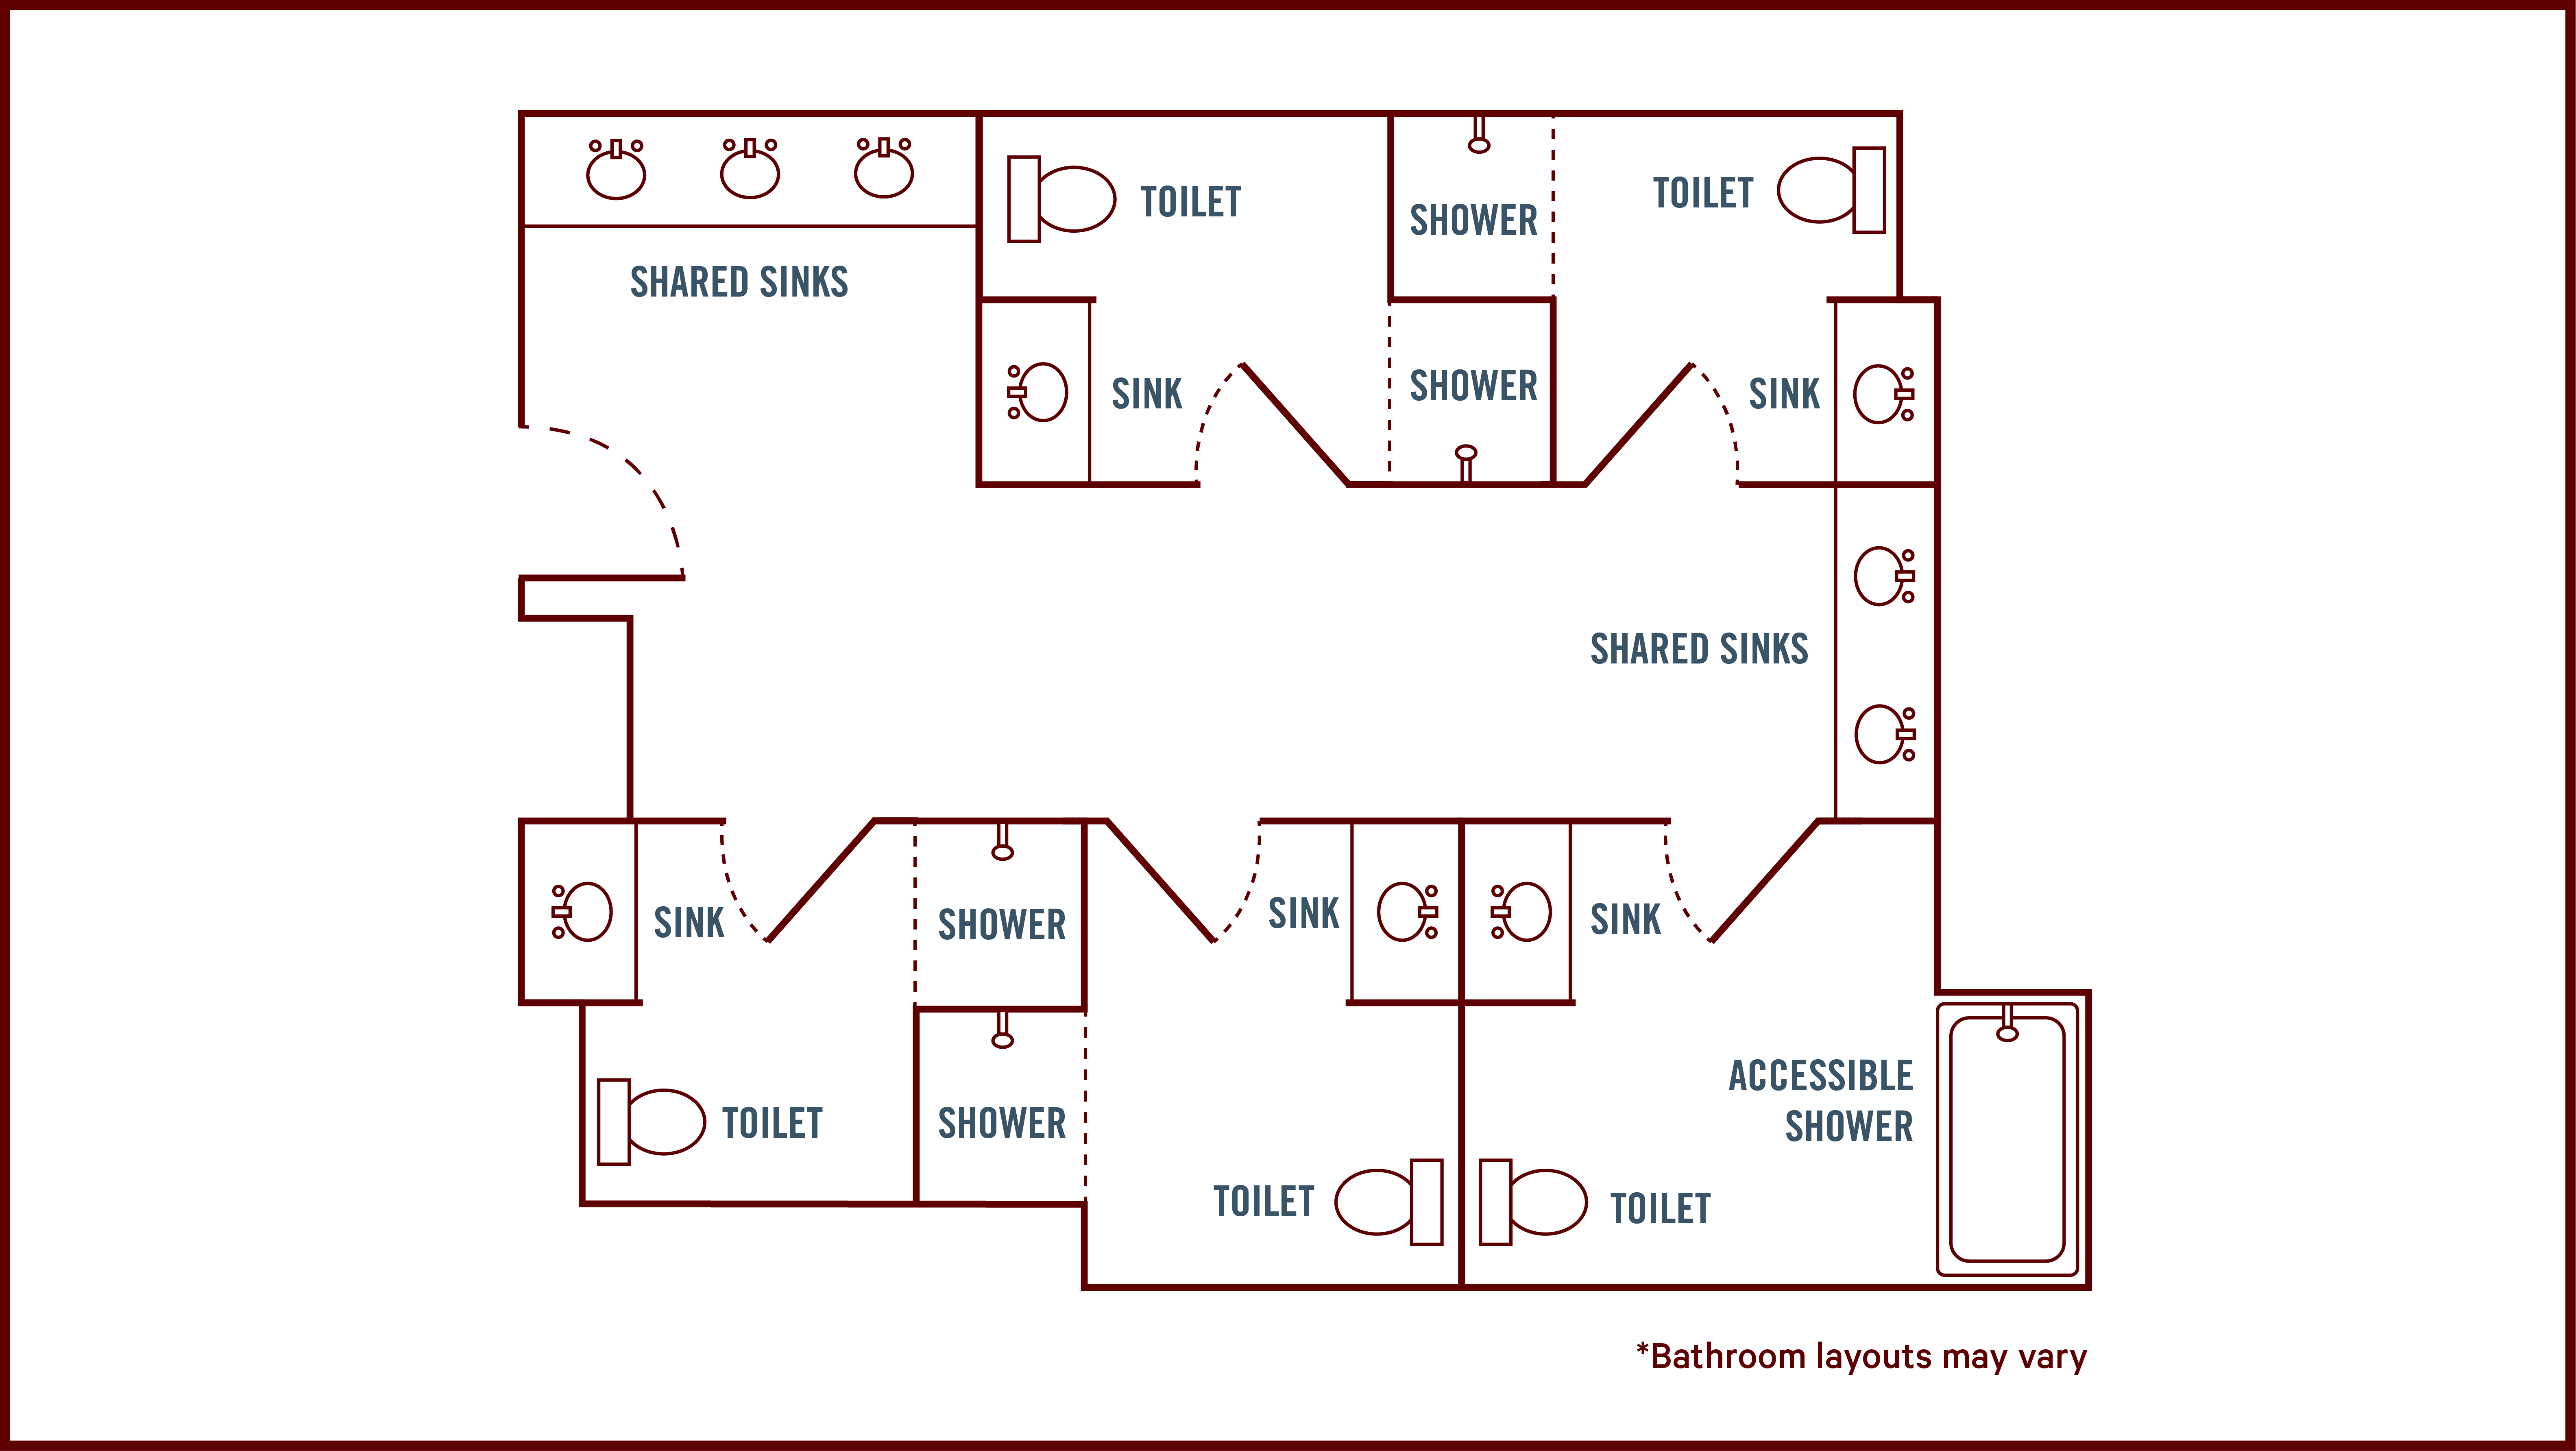 Outline birds eye view of bathroom layout with 4 bathroom stalls and shared sinks